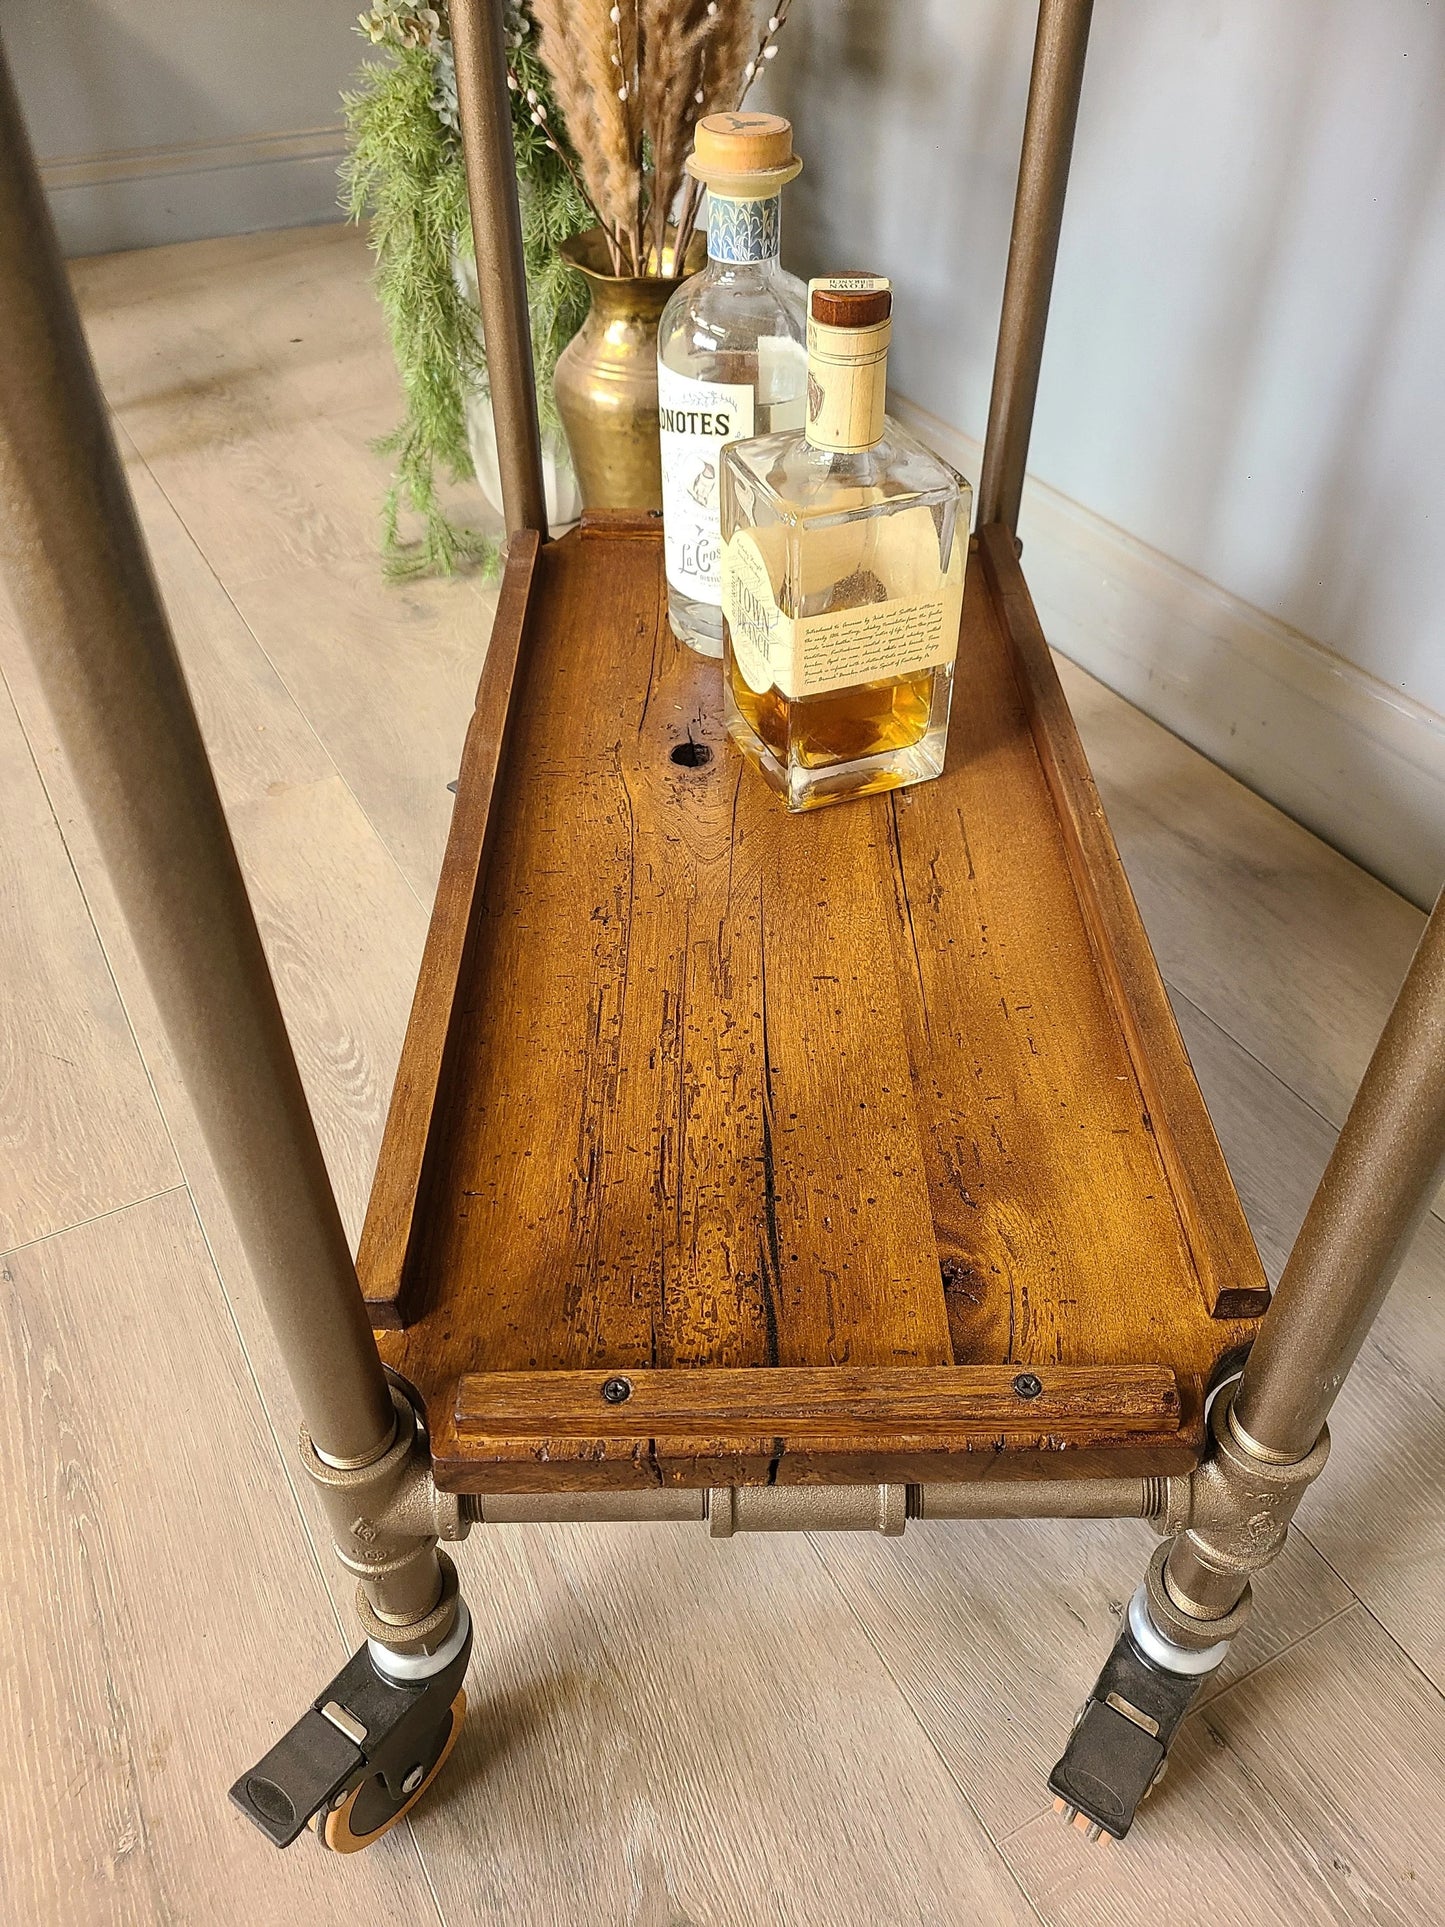 Rolling Bar Cart made of reclaimed barnwood and pipe